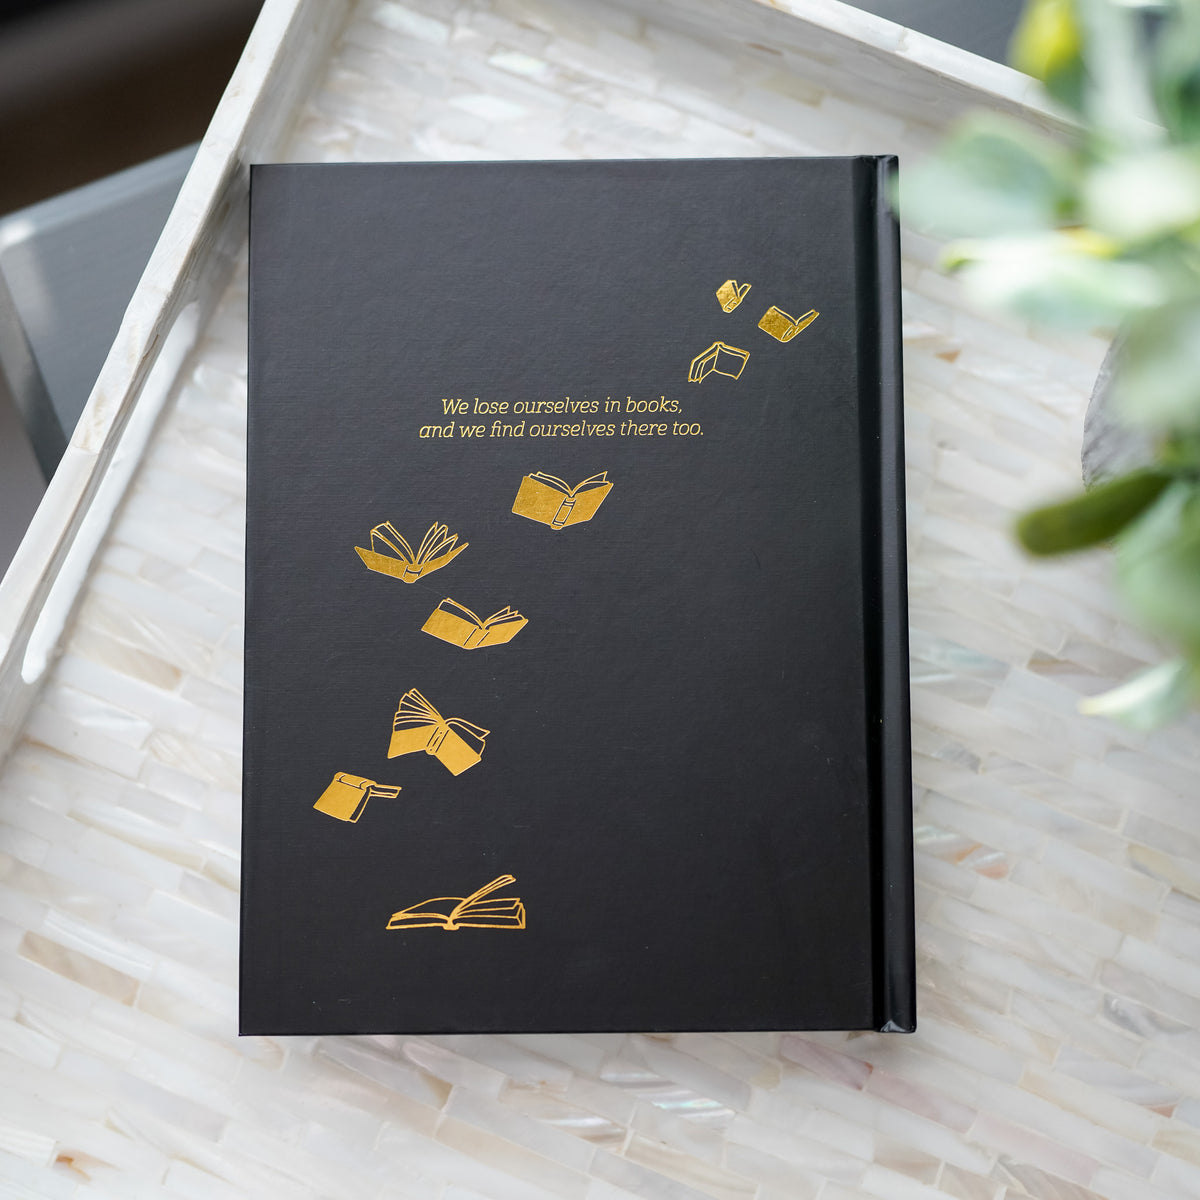 Onyx Reading Journal with Black cover and gold lettering with the words &quot;The Reading Journal&quot; and flying books